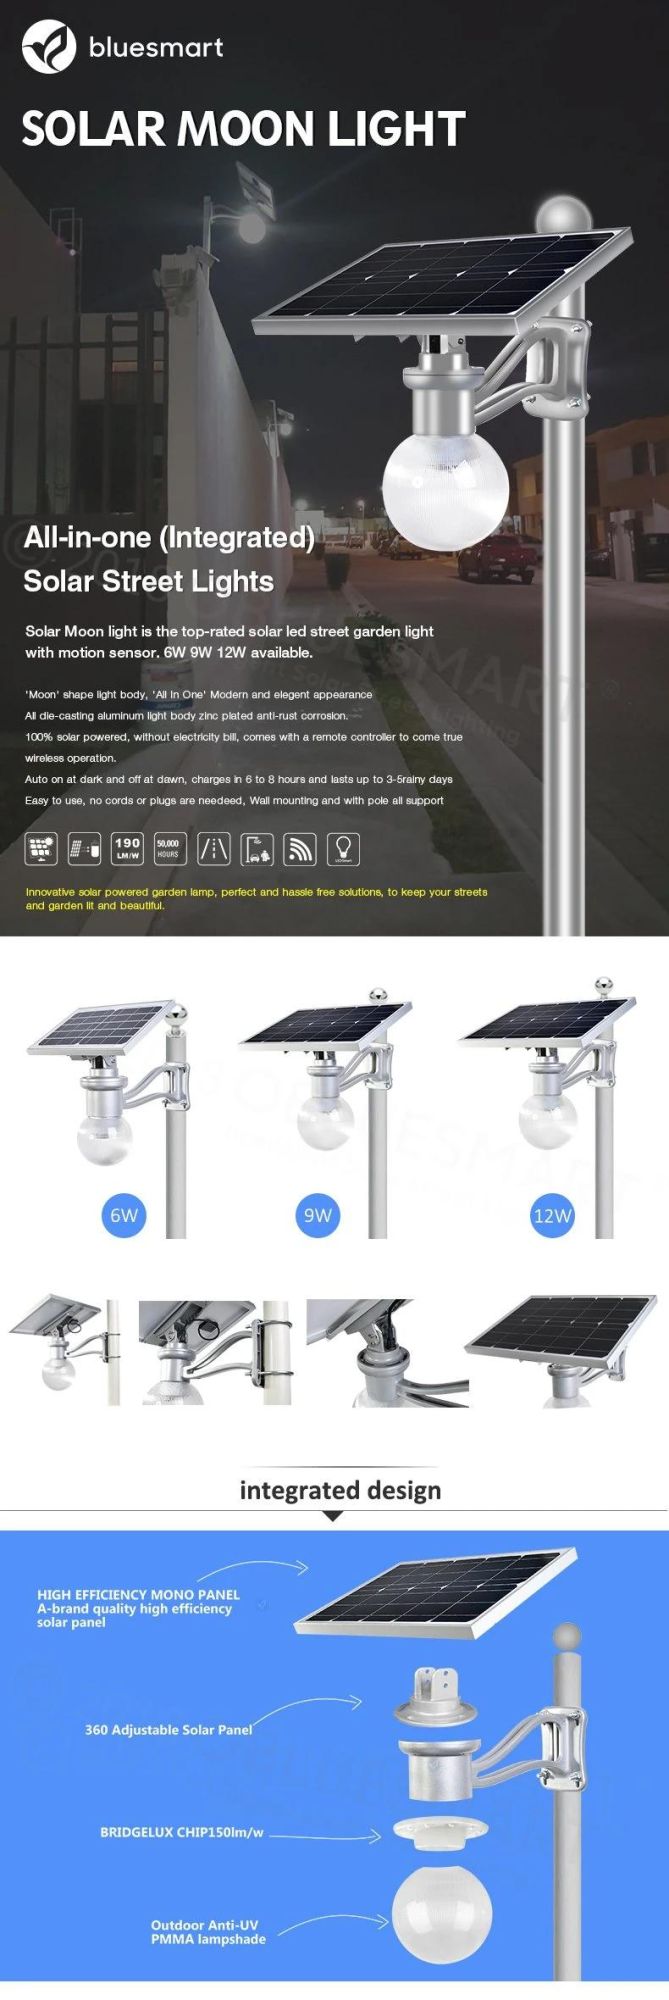 Hot Selling Solar Outdoor LED Garden Light with Multi-Working Modes